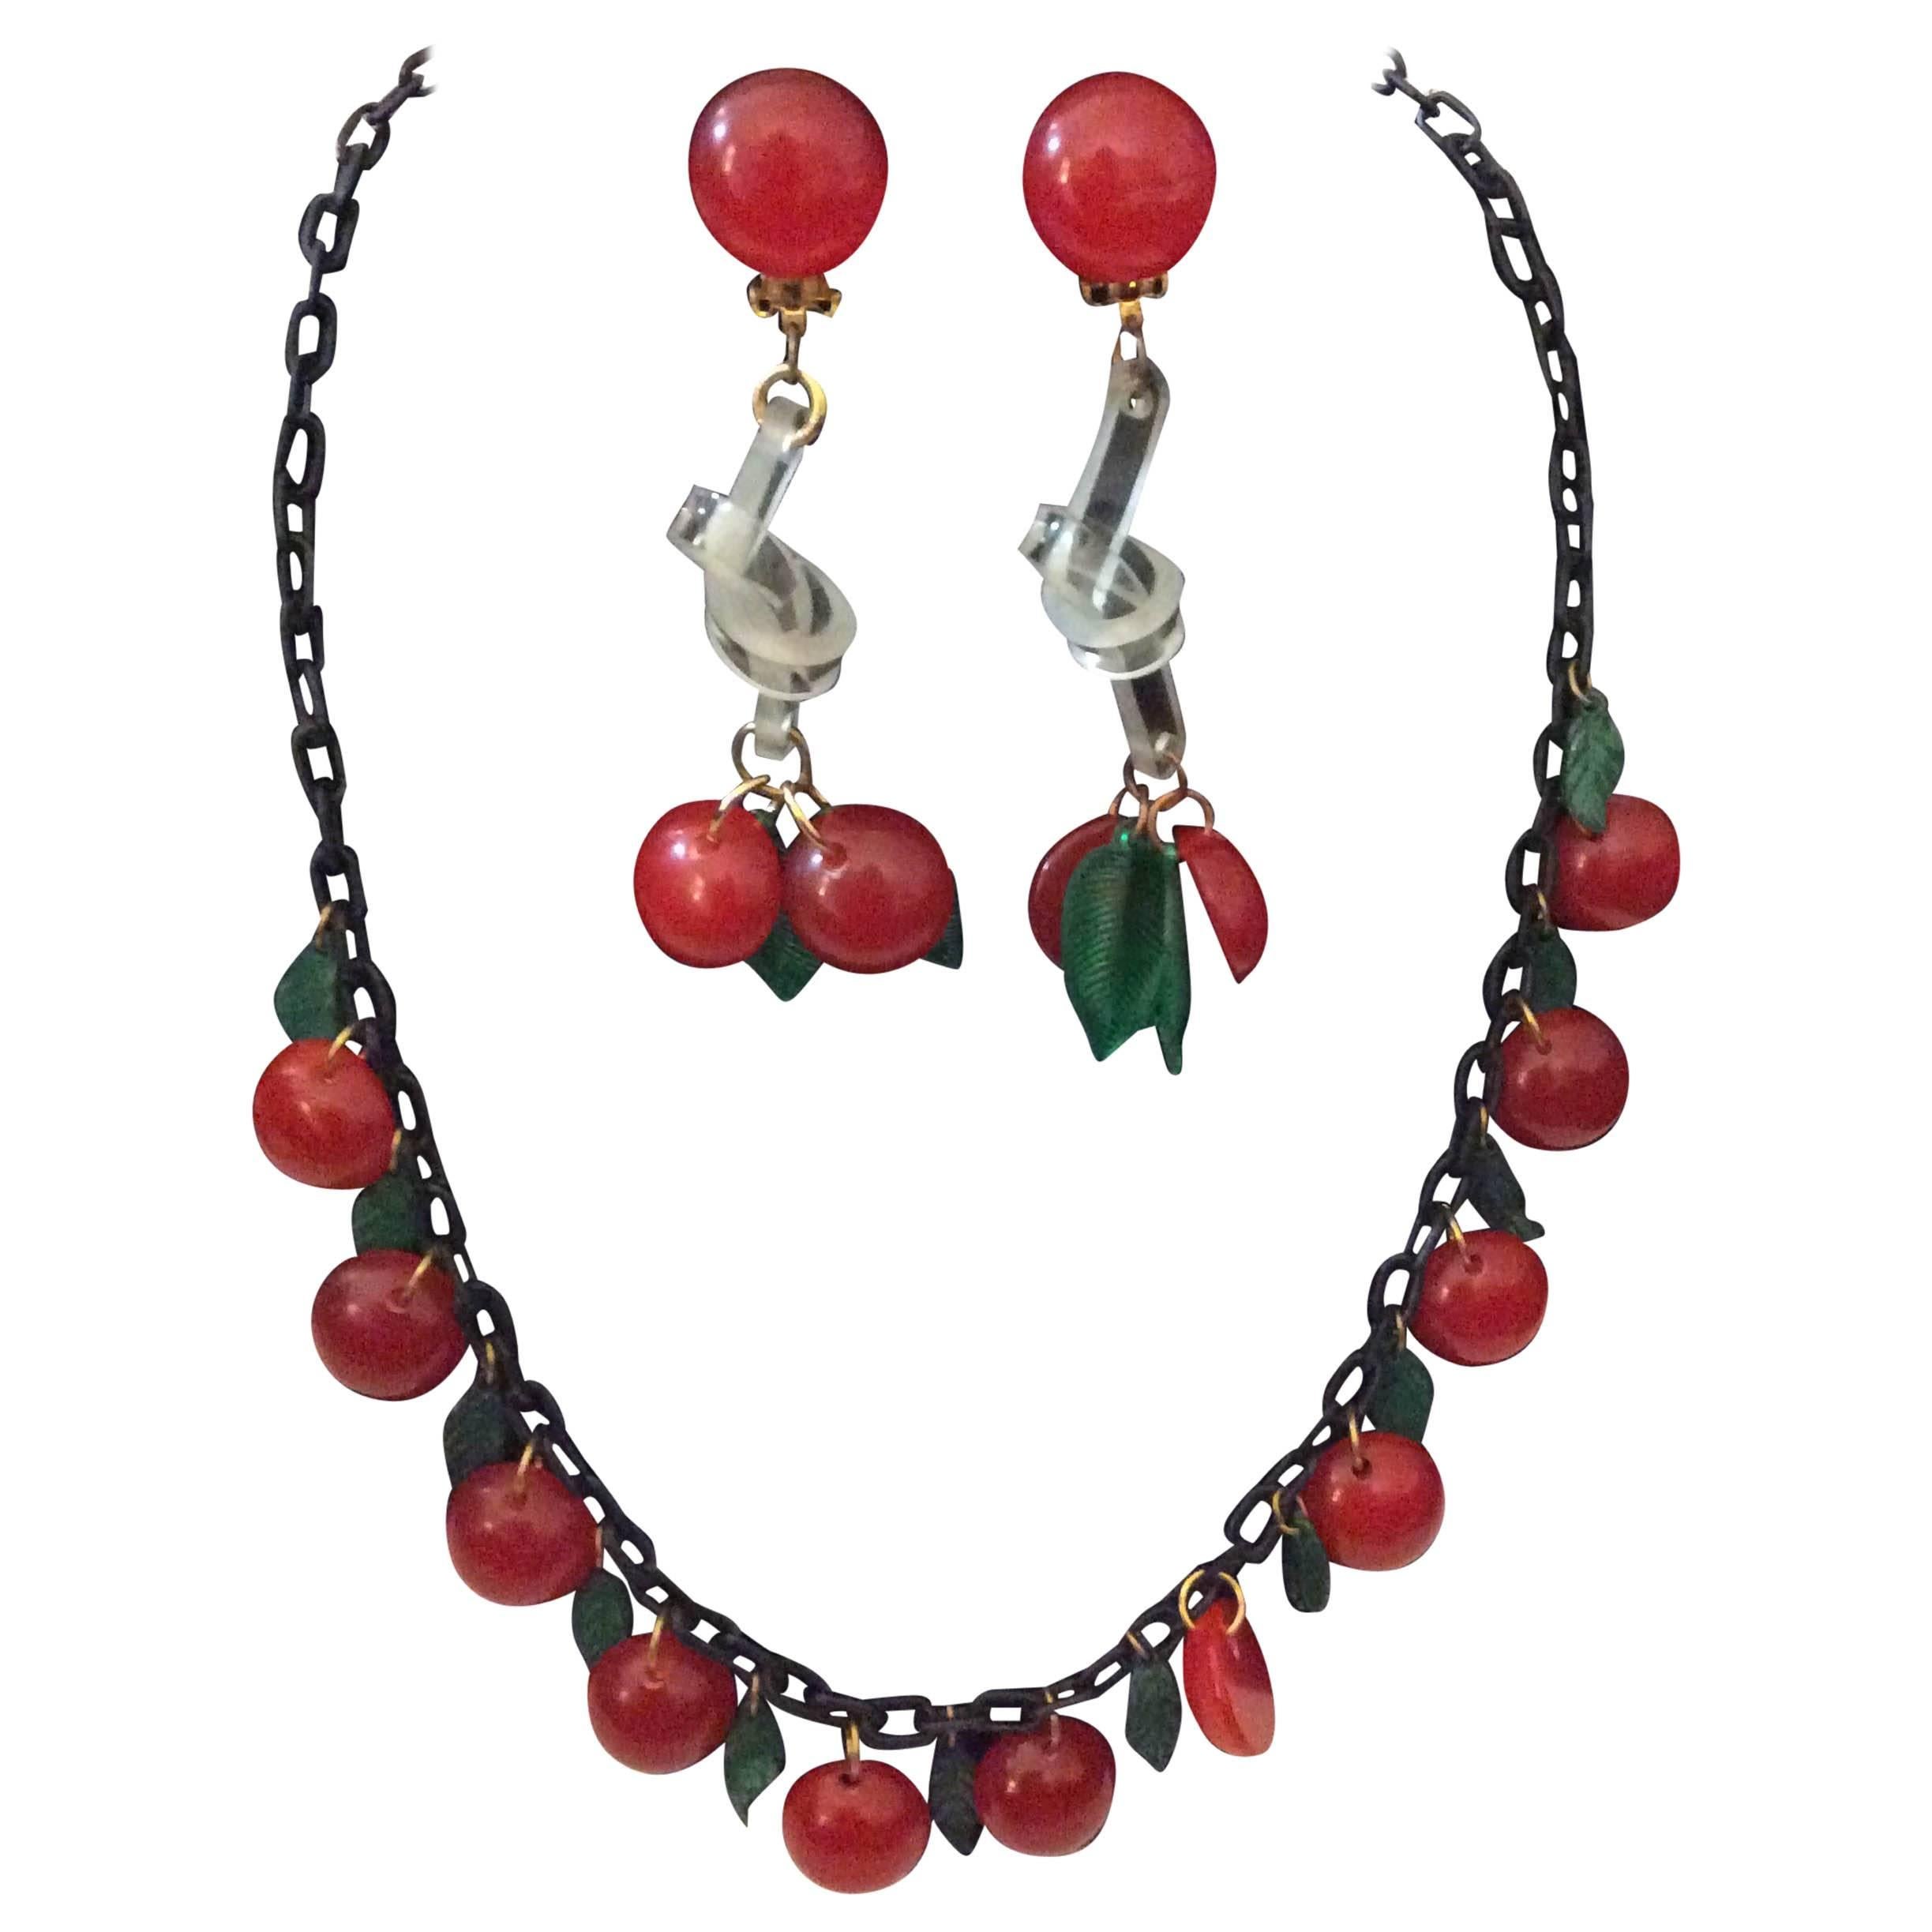  Bakelite Cherry Necklace with Matching Earrings For Sale